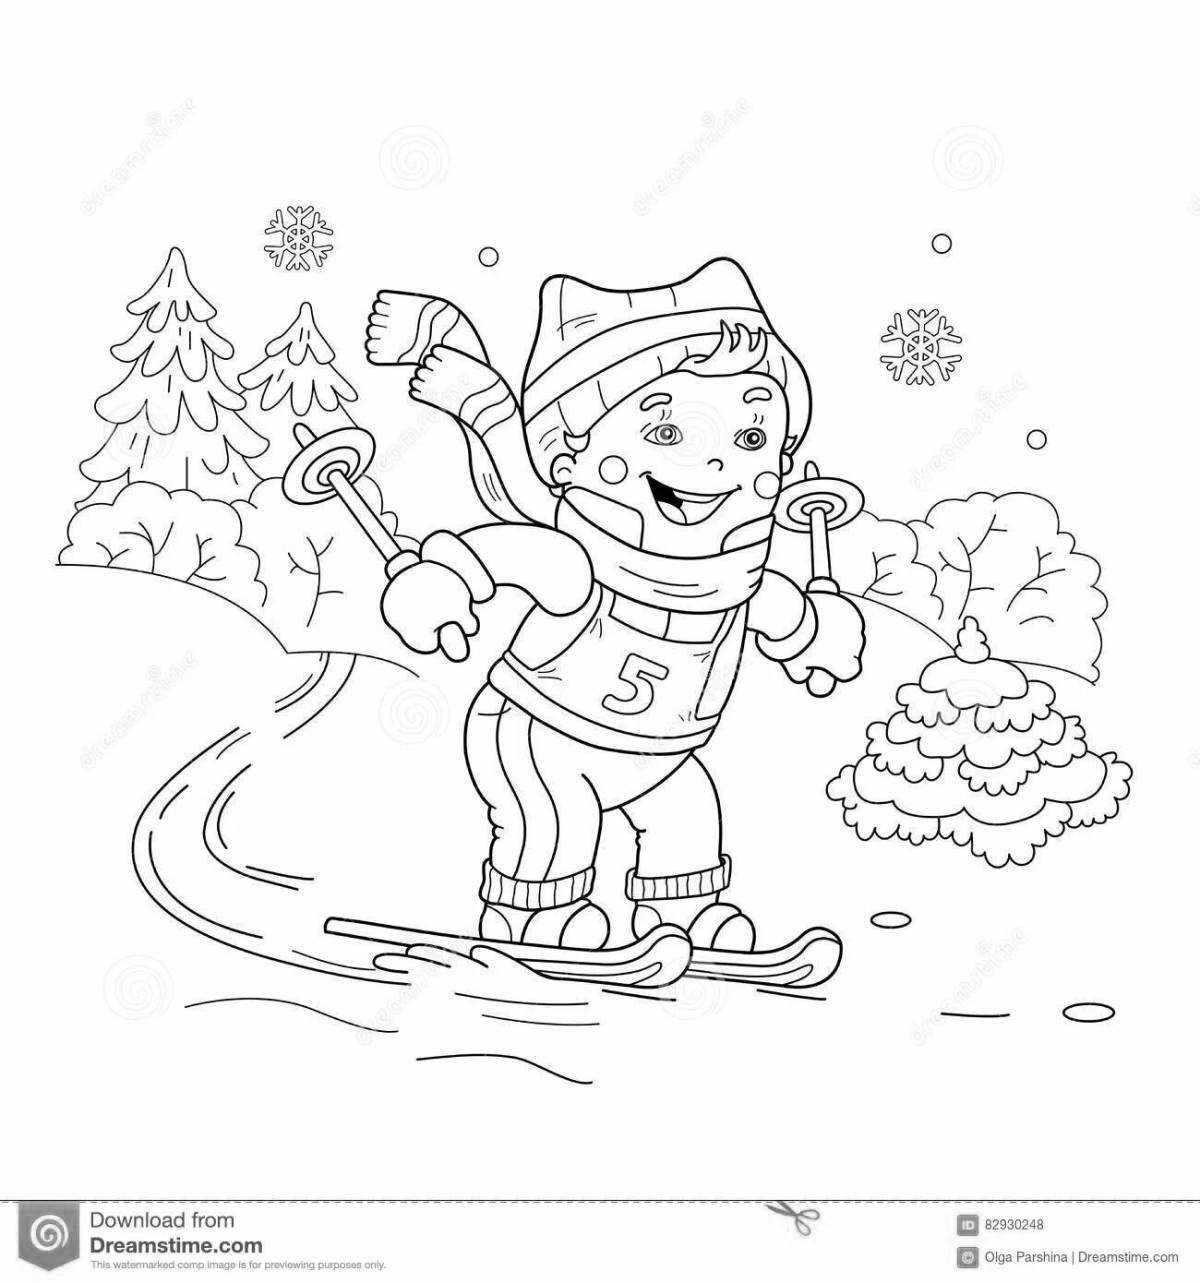 A fun coloring book for a boy on skis